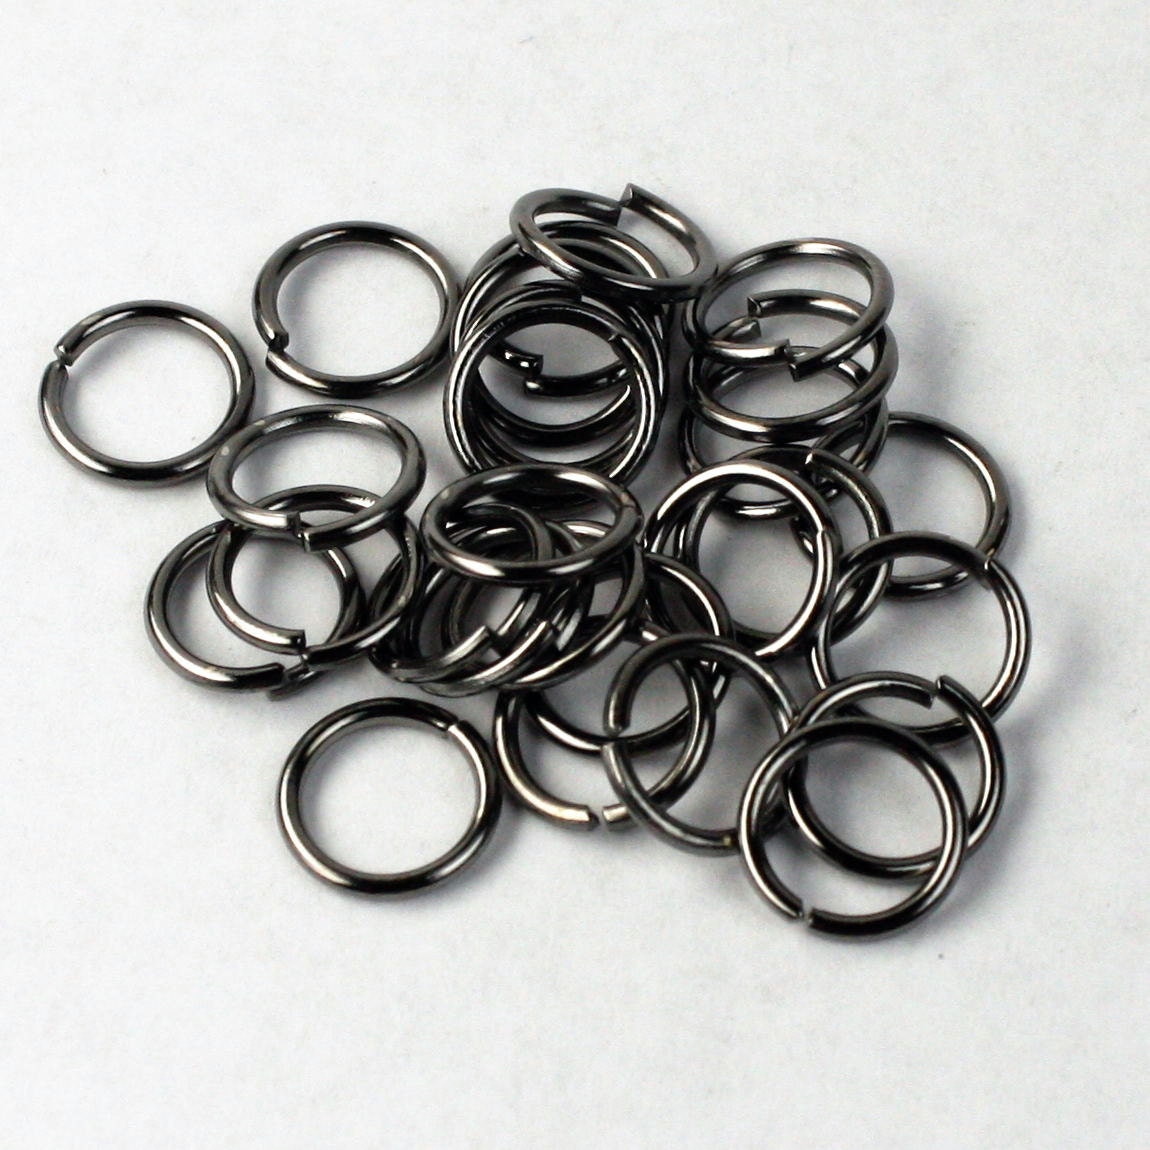 50 New Solid Black 8mm Stainless Steel Jump Rings 16 Gauge Jewelry  Connectors